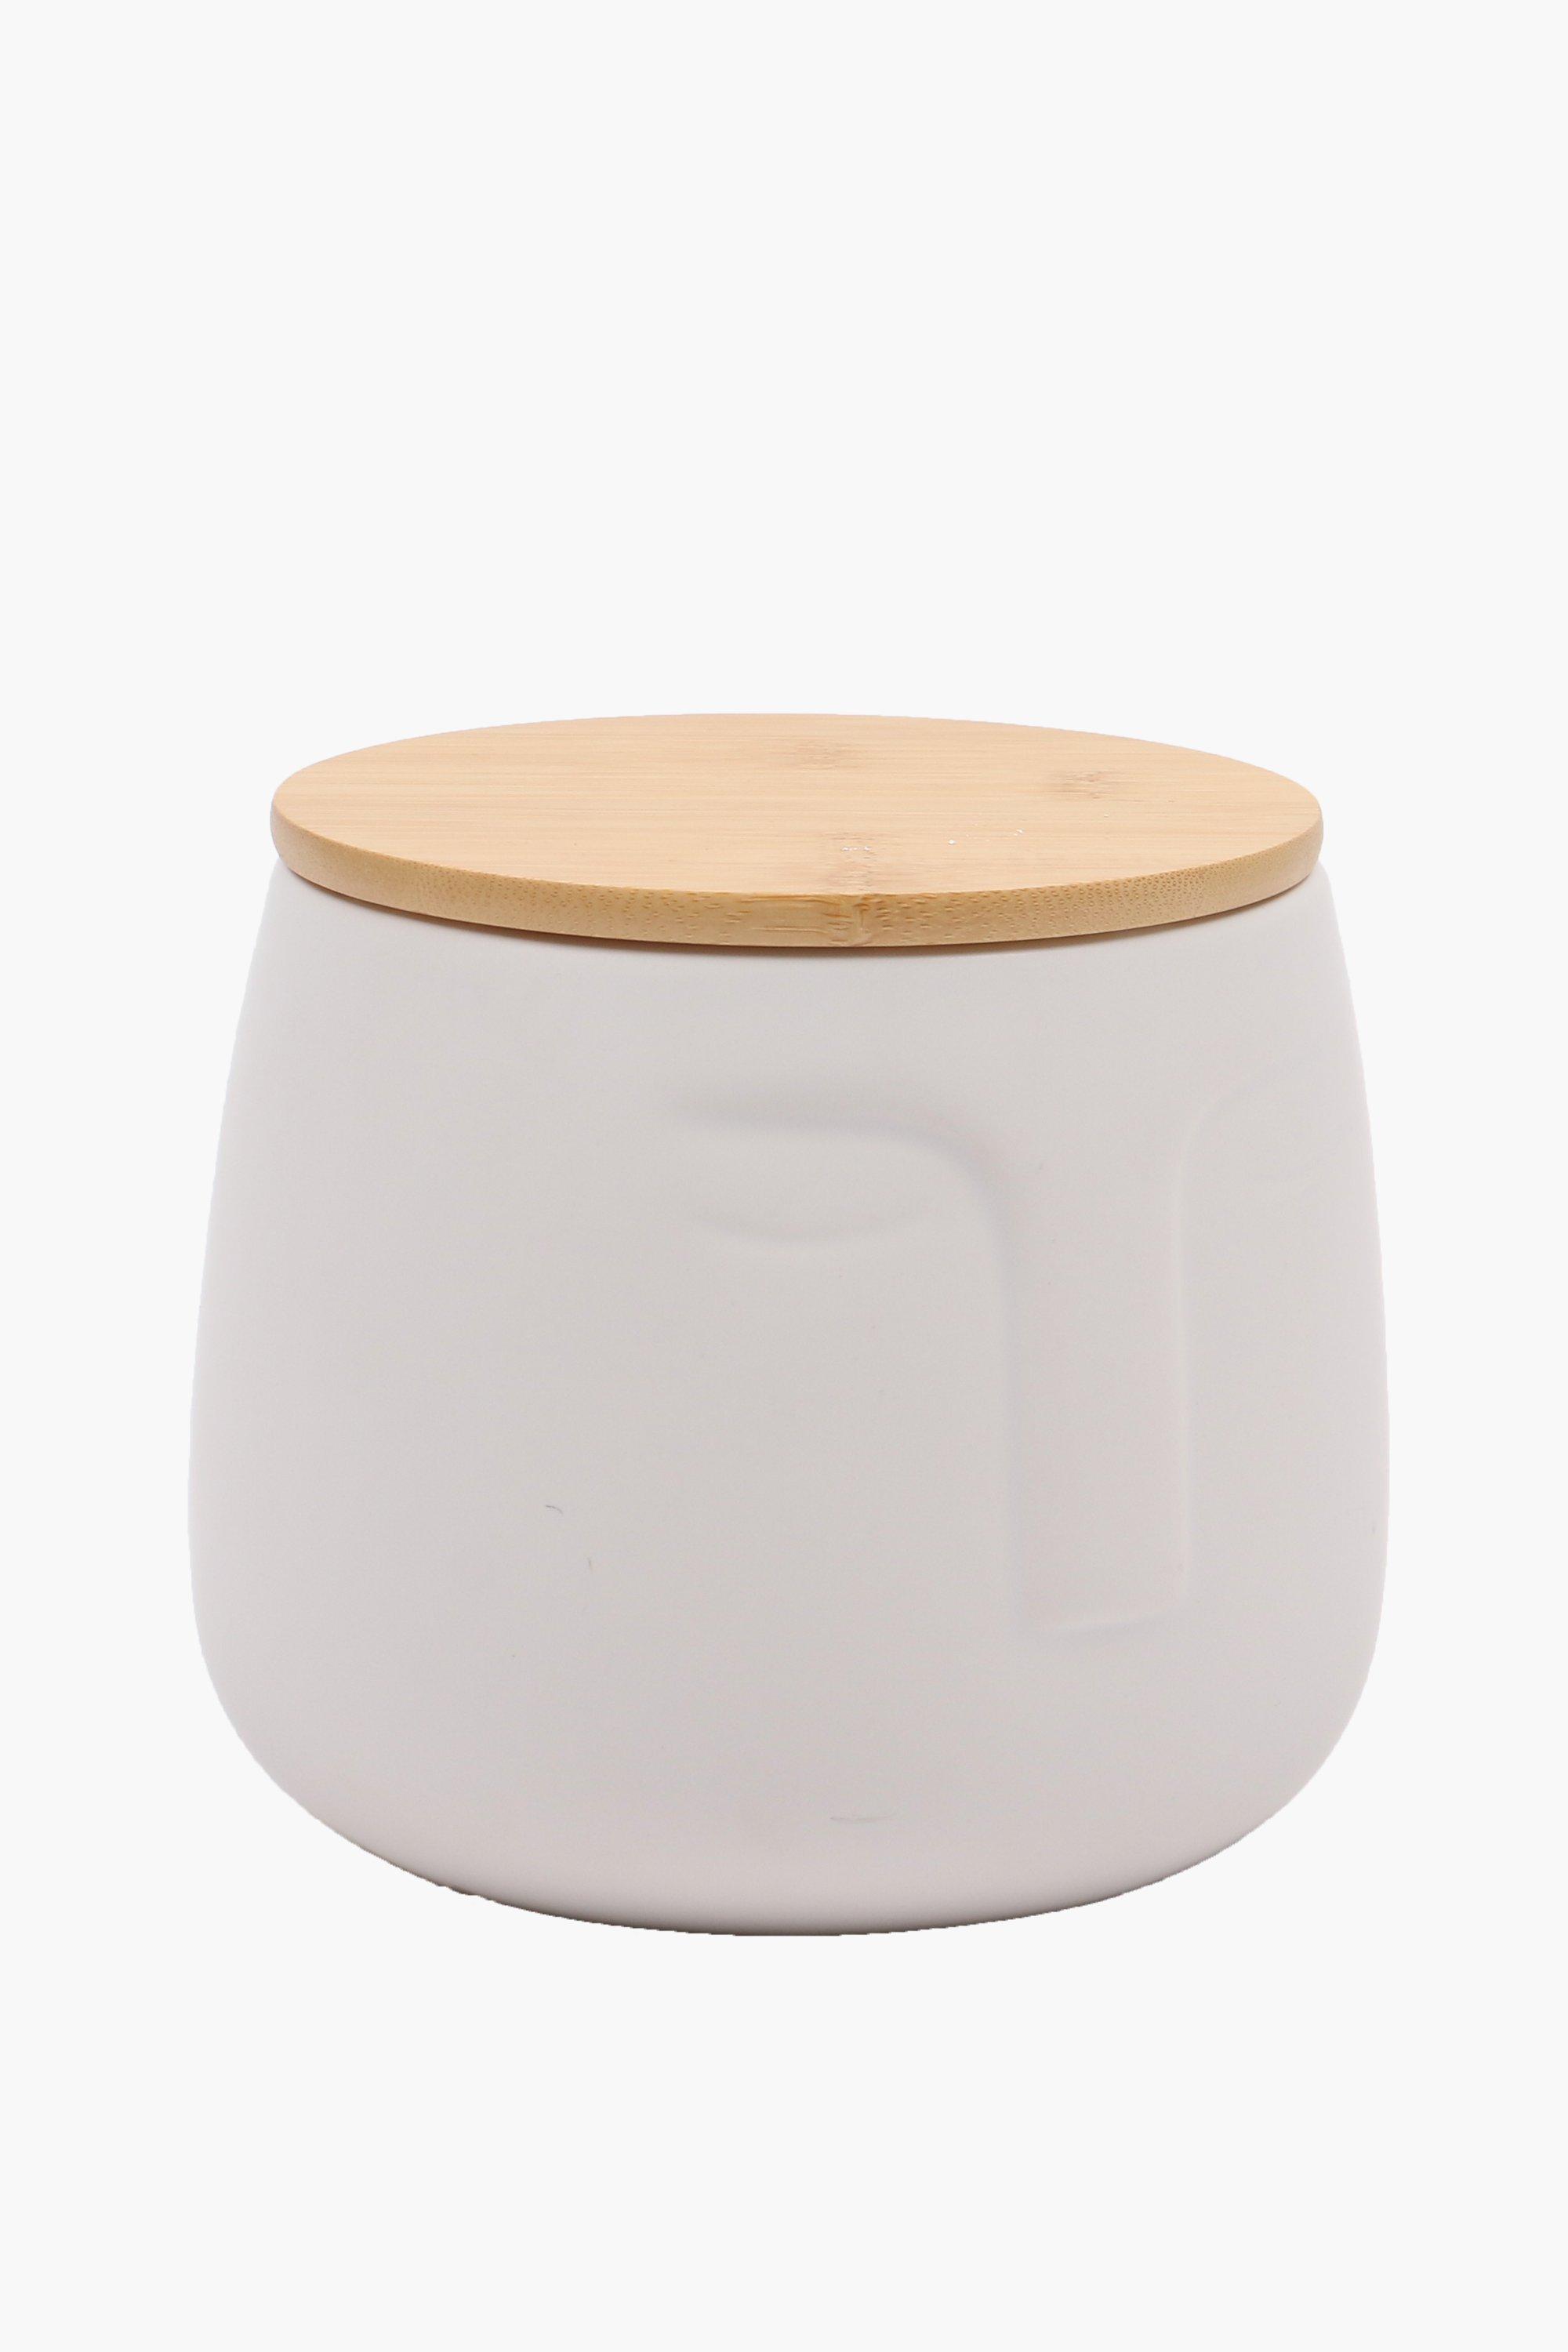 Face Canister With Wood Lid, Large